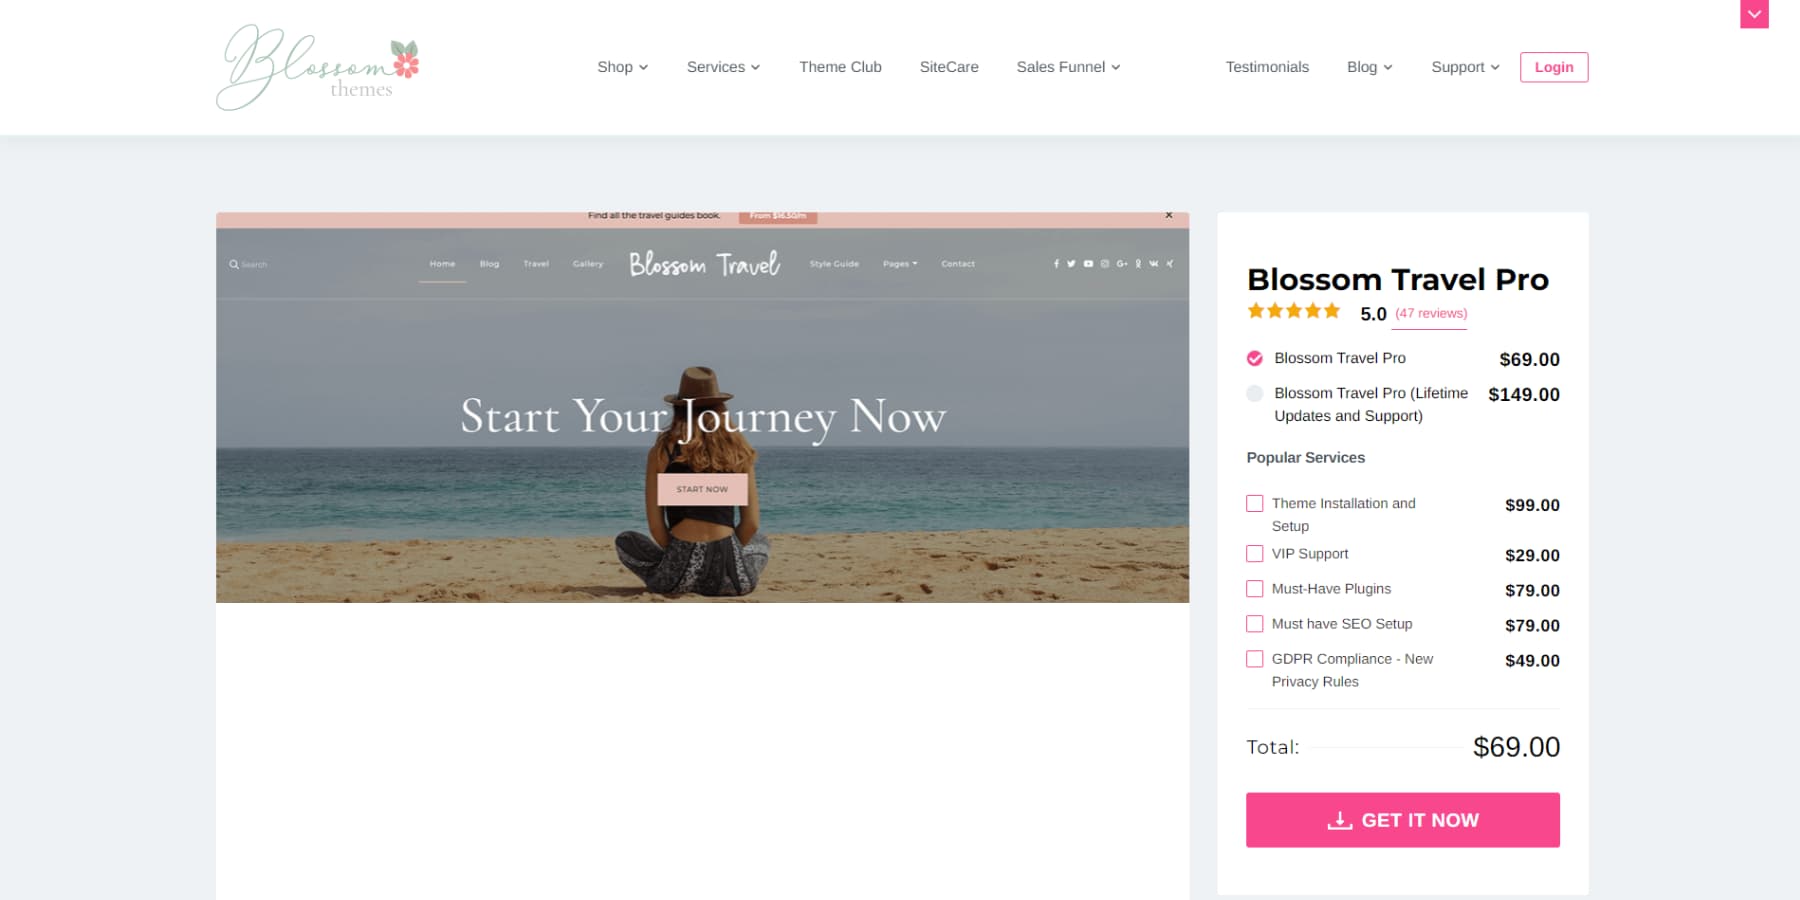 A screenshot of Blossom Travel Pro's home page